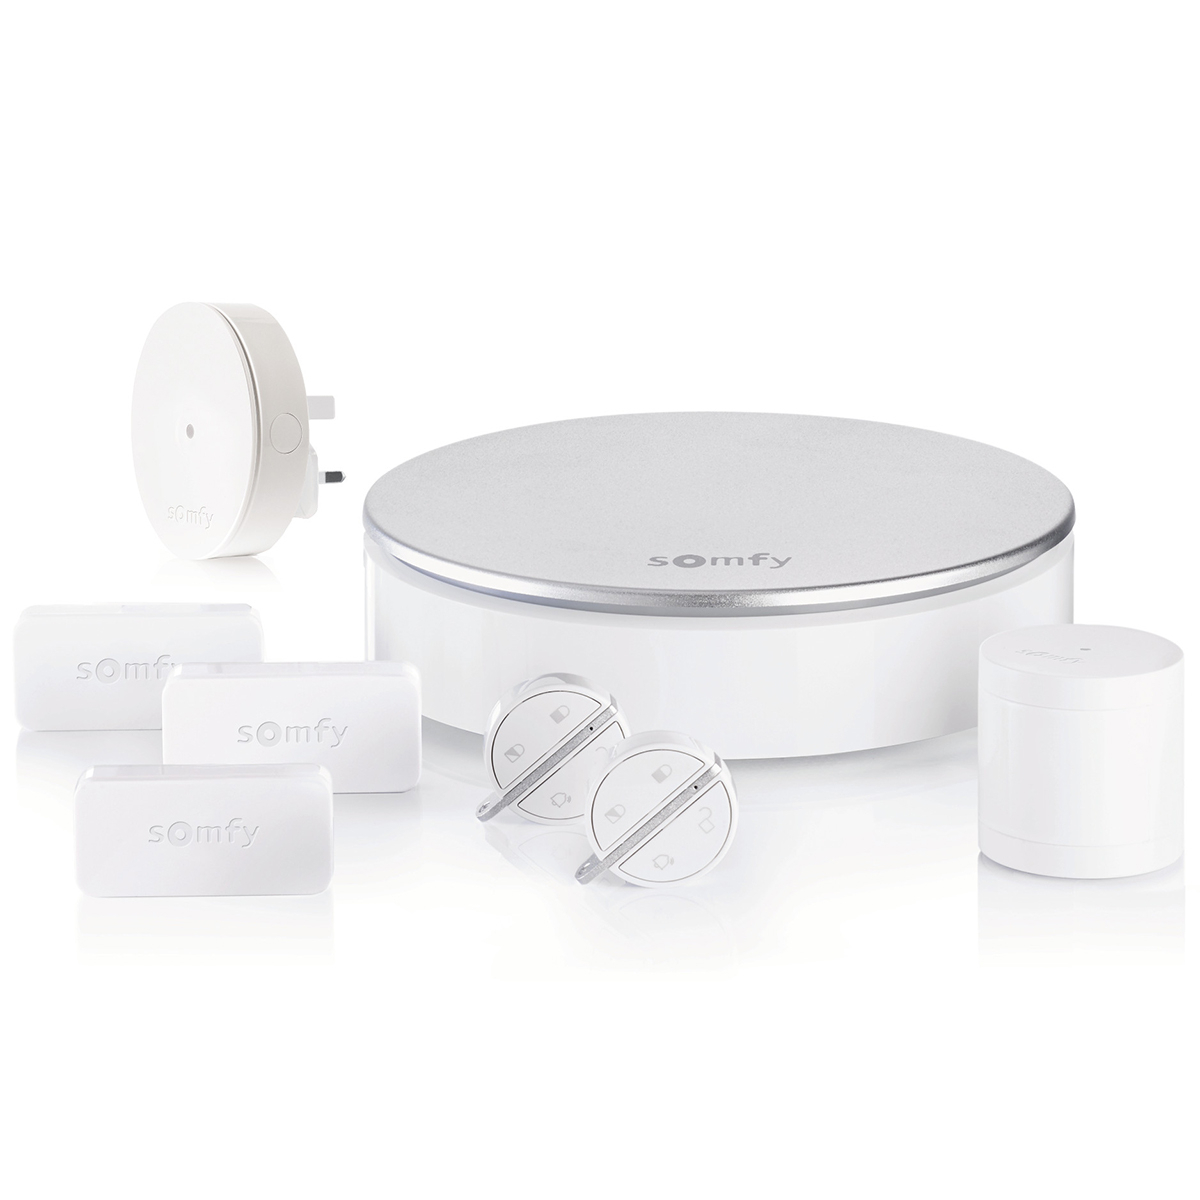 Somfy Protect Home Alarm